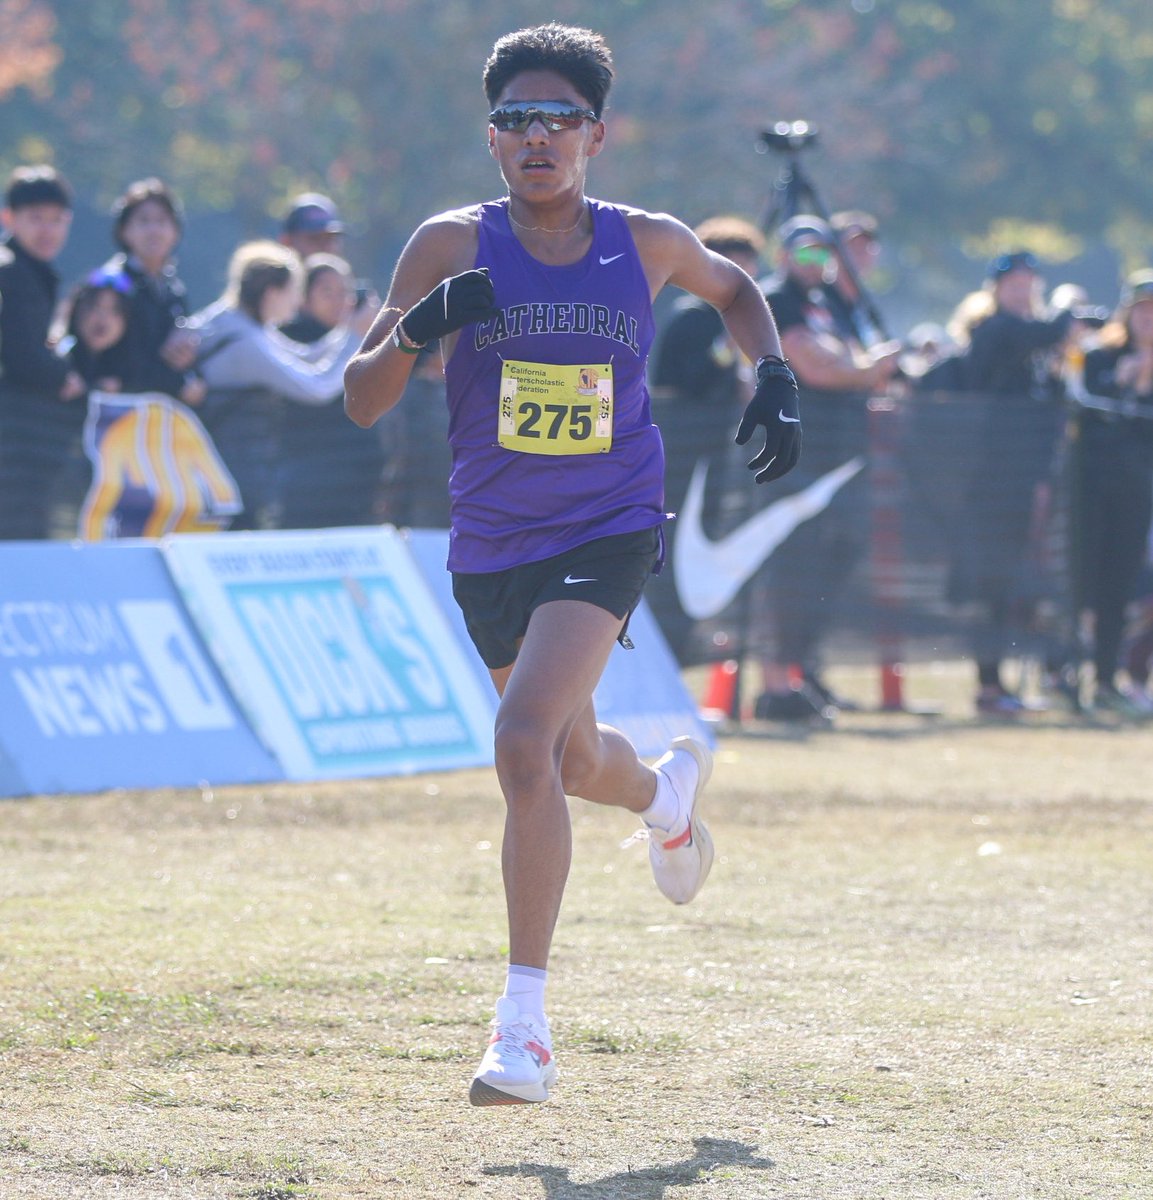 Emmanuel Perez of Cathedral defends his D4 California State Meet title in a blistering time of 14:45.5